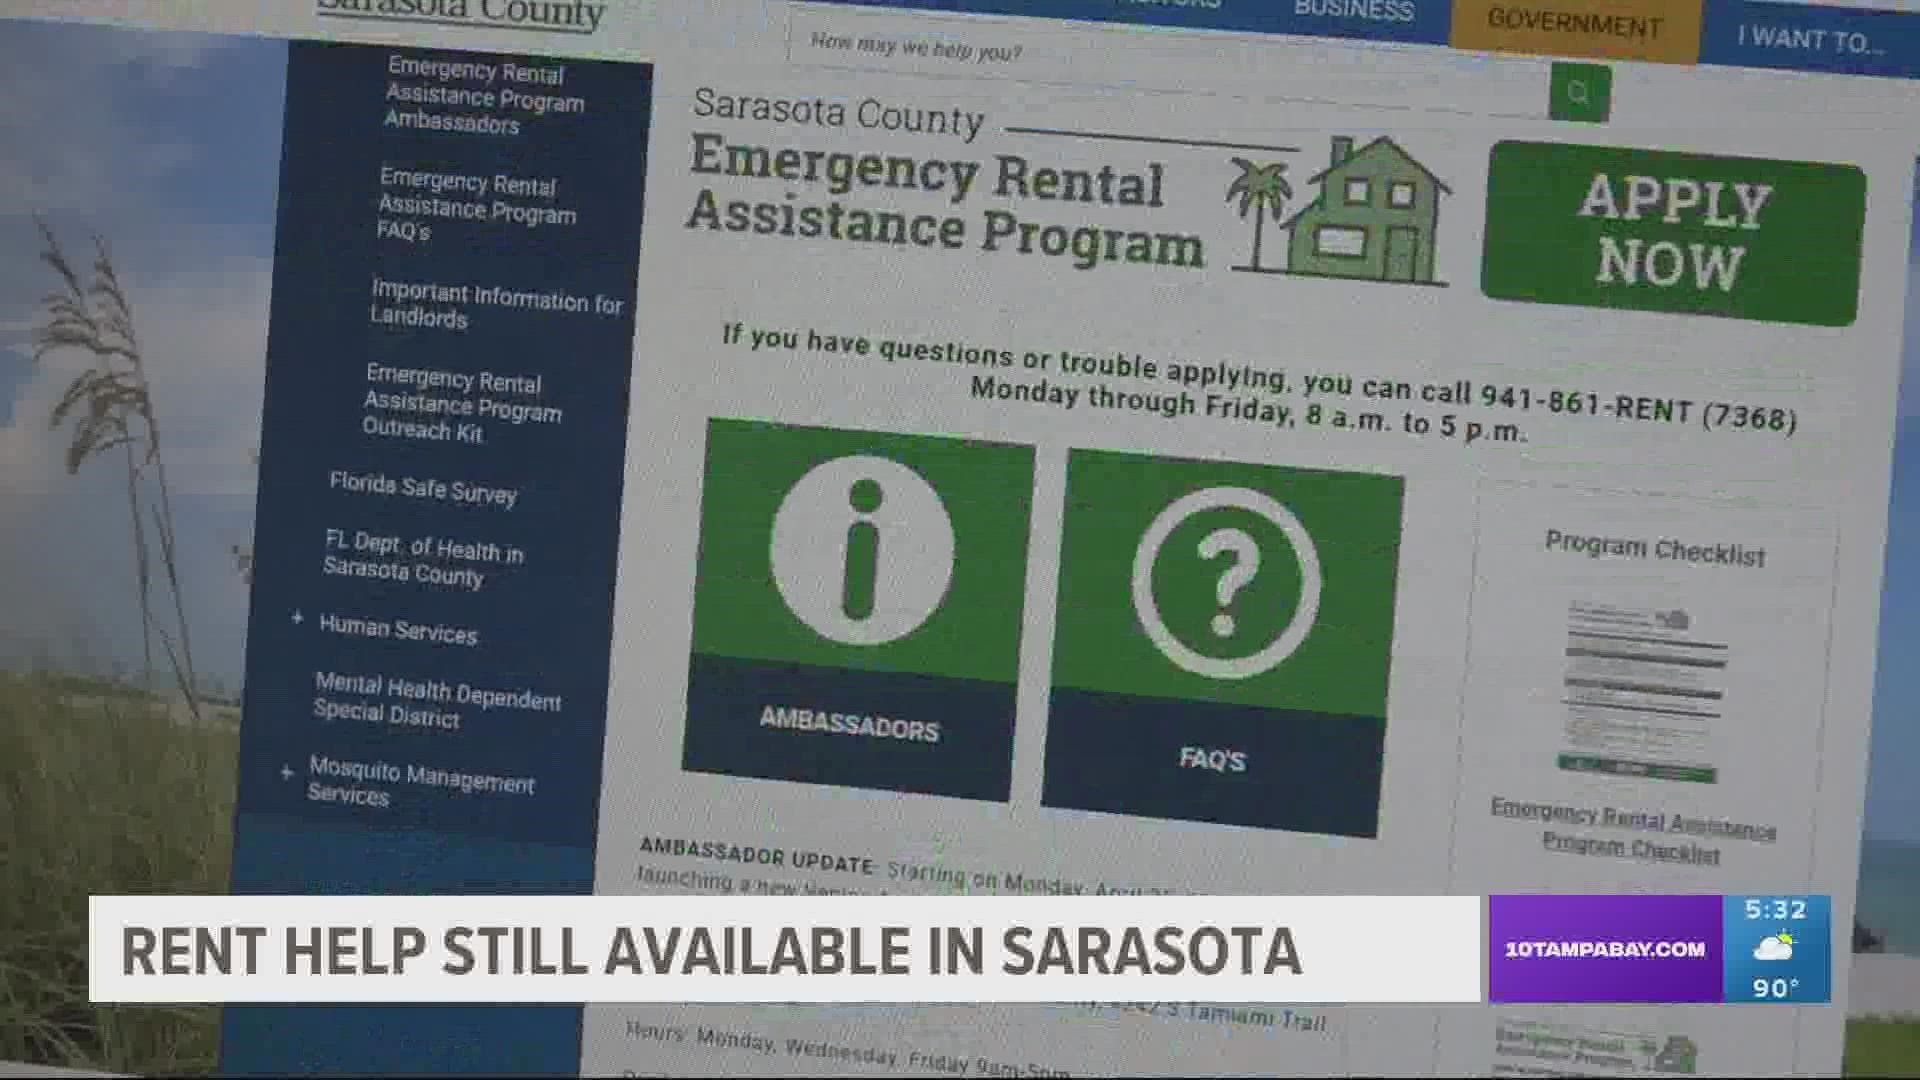 Last year, Sarasota County ERAP received $17.2 million from the U.S. Department of the Treasury and has disbursed $11 million so far.